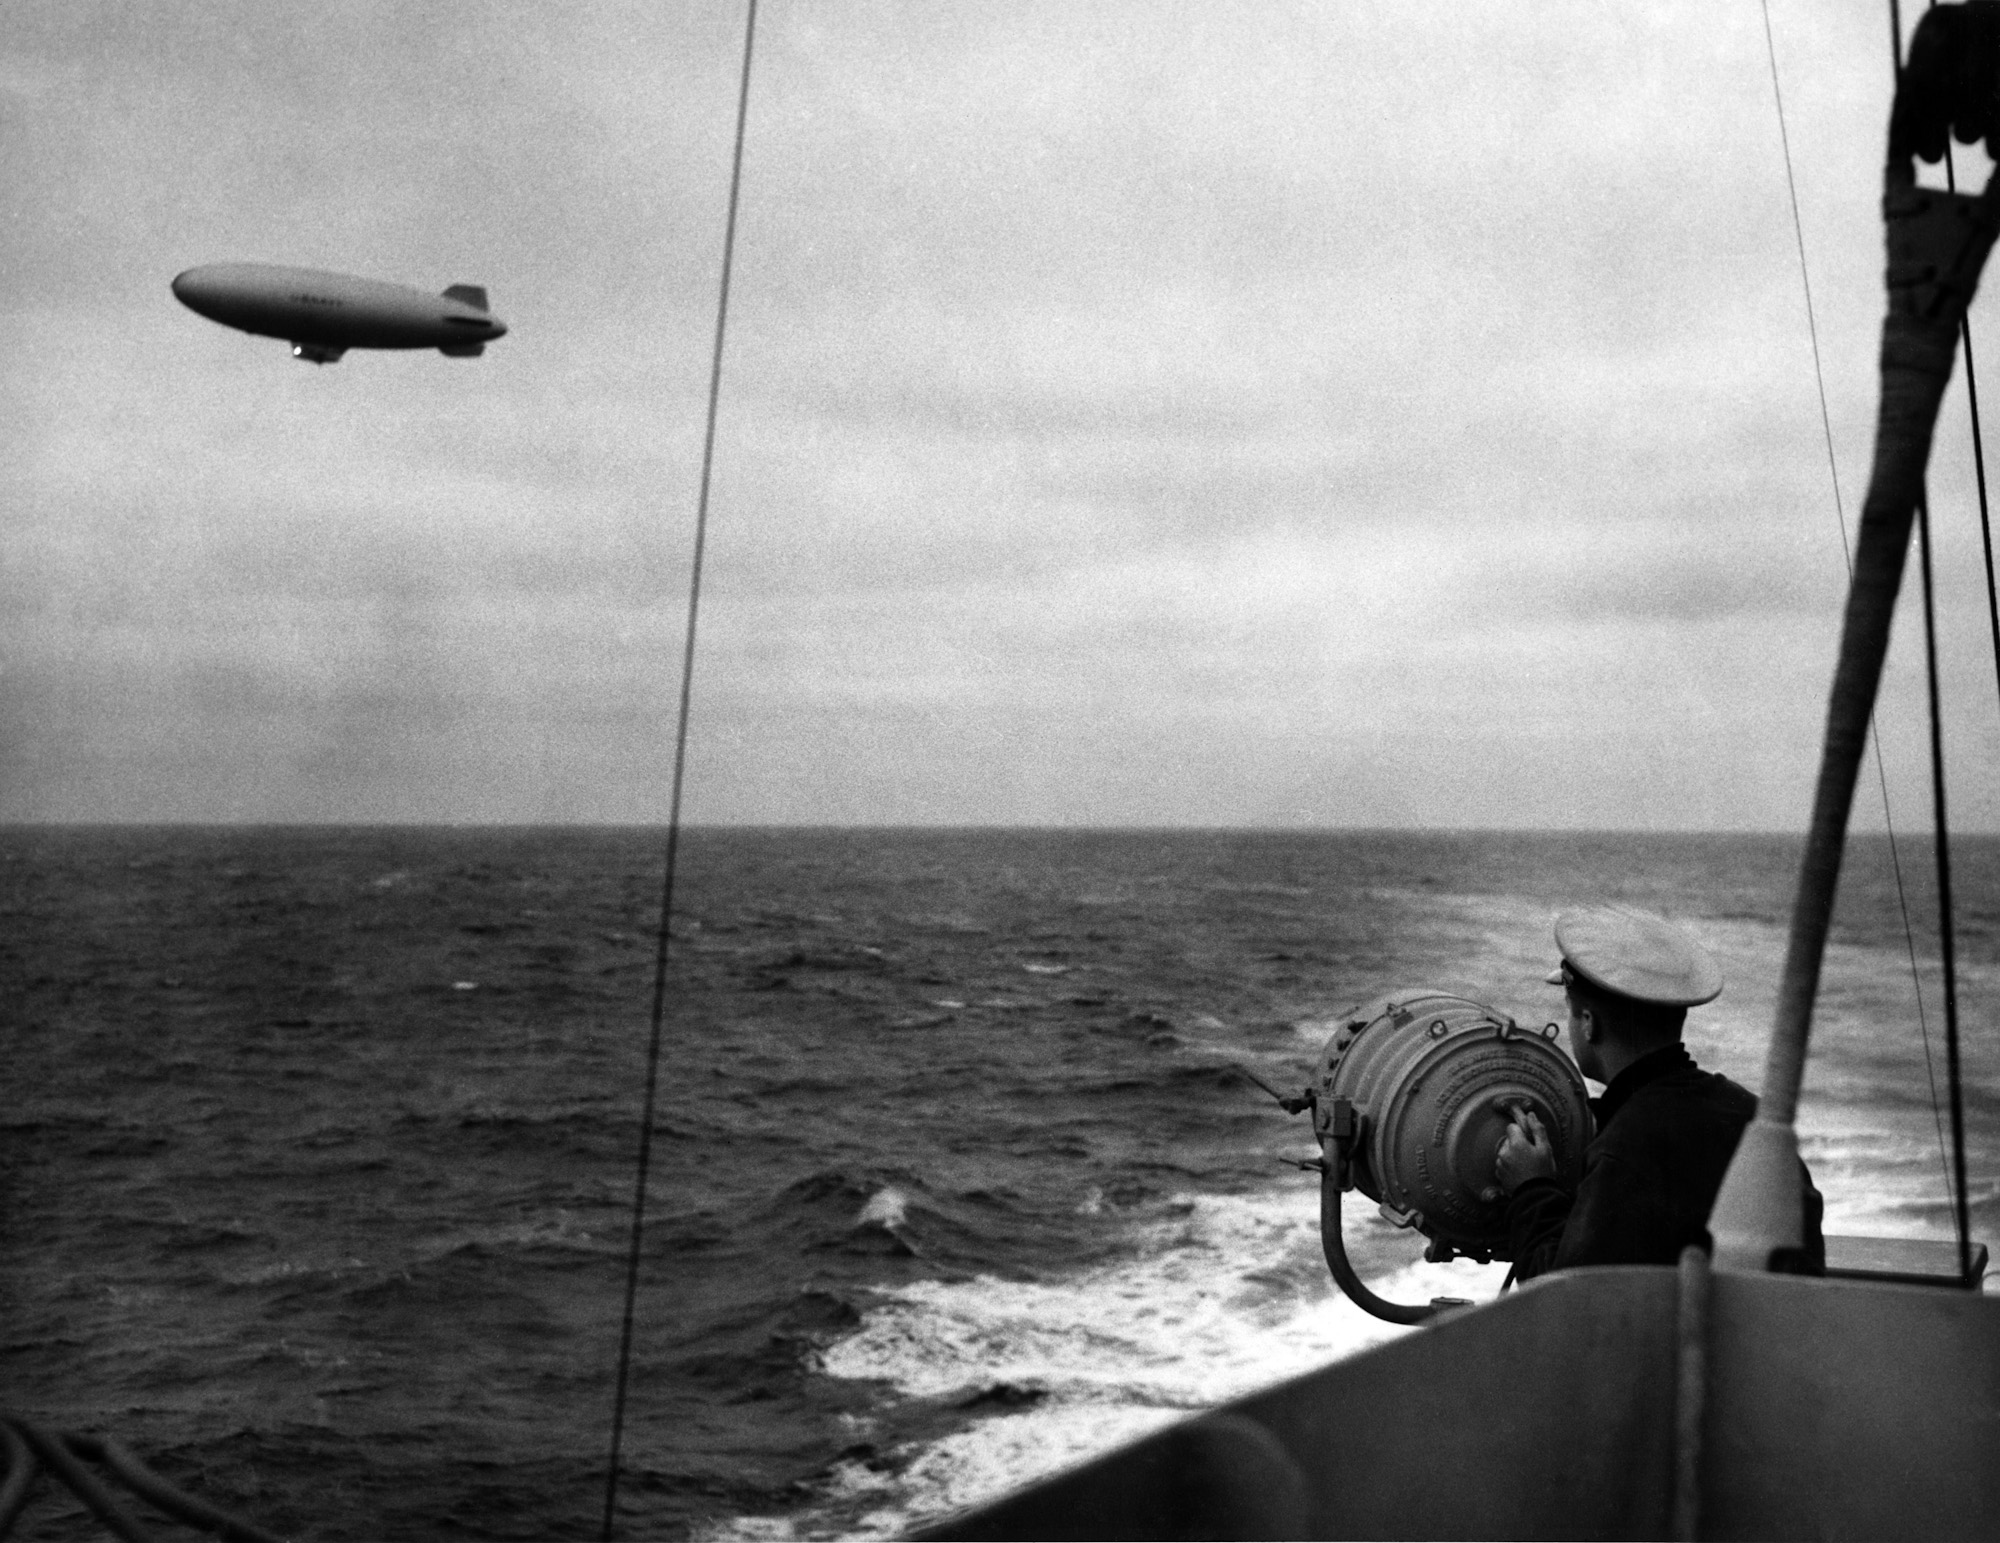 US Coast Guard Cutter Duane exchanging blinker signals with a US Navy K-class airship, 1943.  Both crafts were serving as convoy escorts in the North Atlantic.